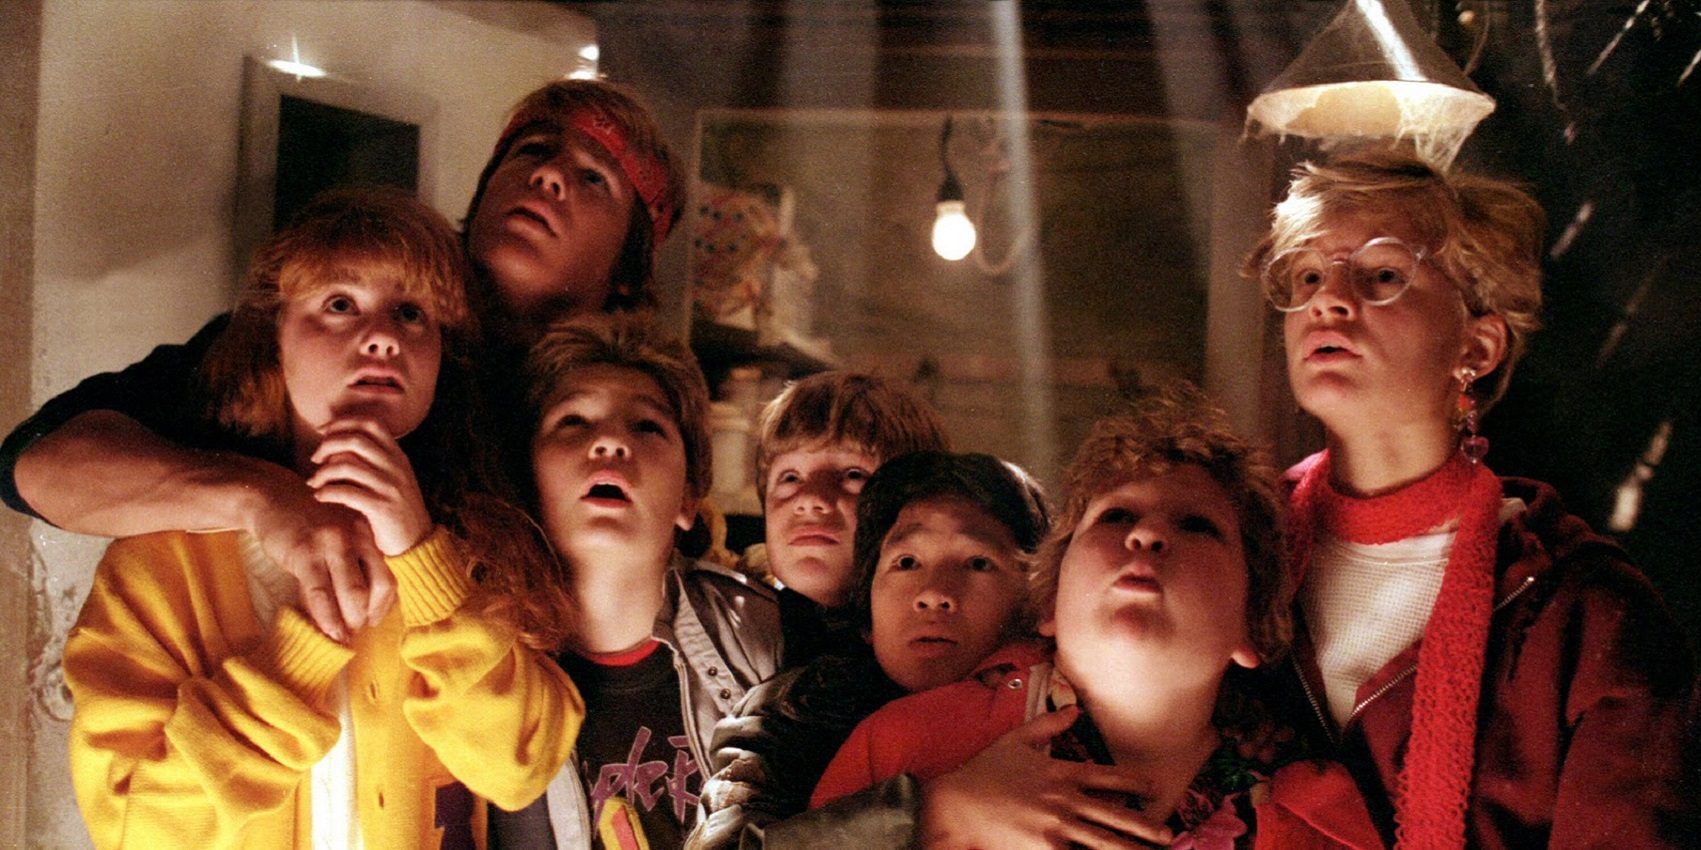 10 Things That Make No Sense About The Goonies